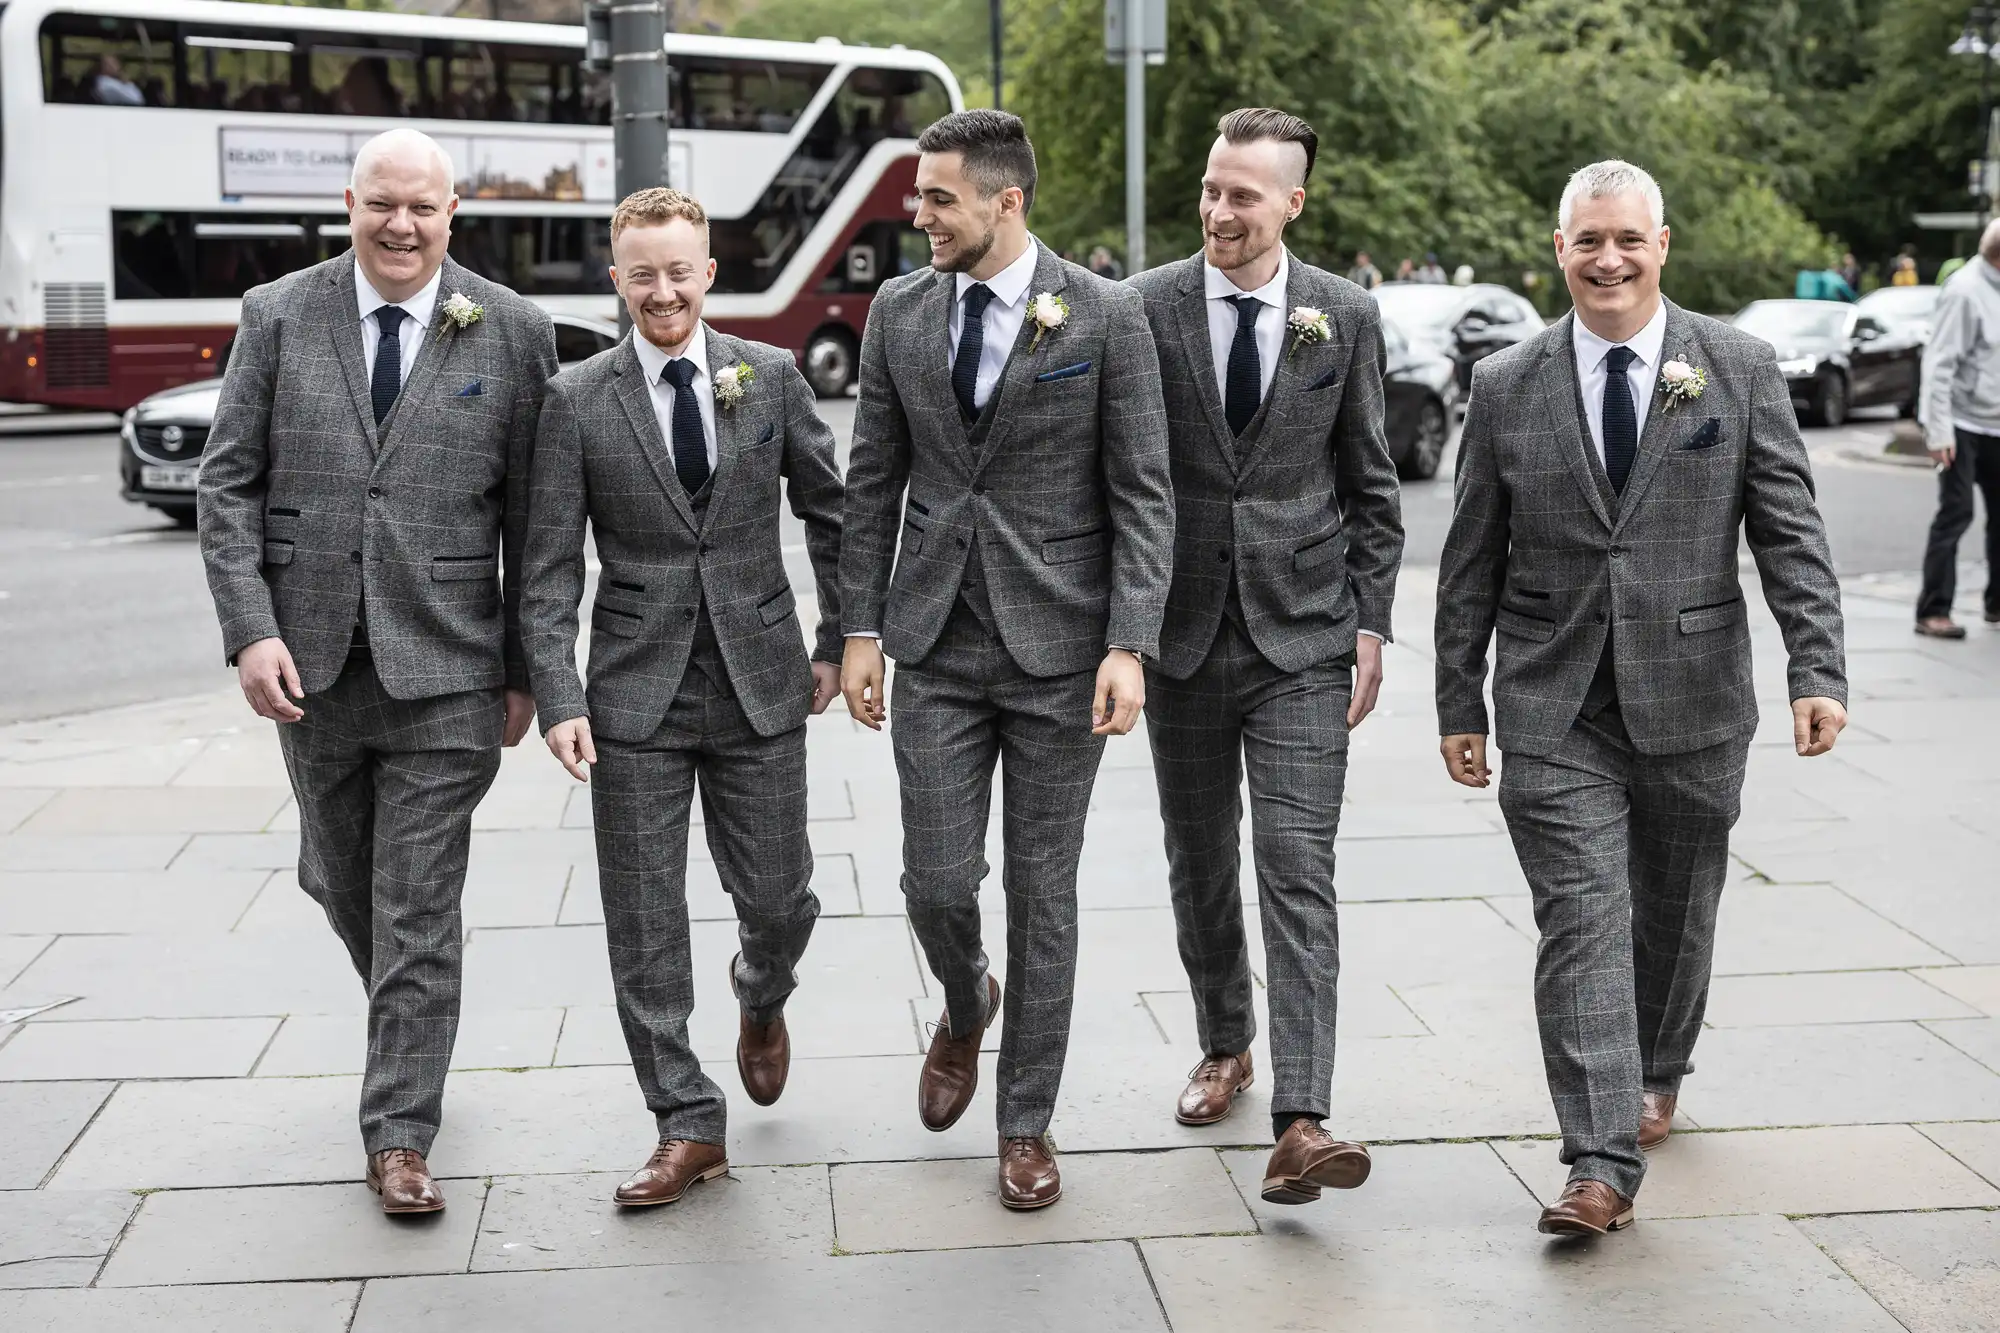 Five men in matching gray suits and boutonnieres walk together and smile on a city sidewalk, with buses in the background.